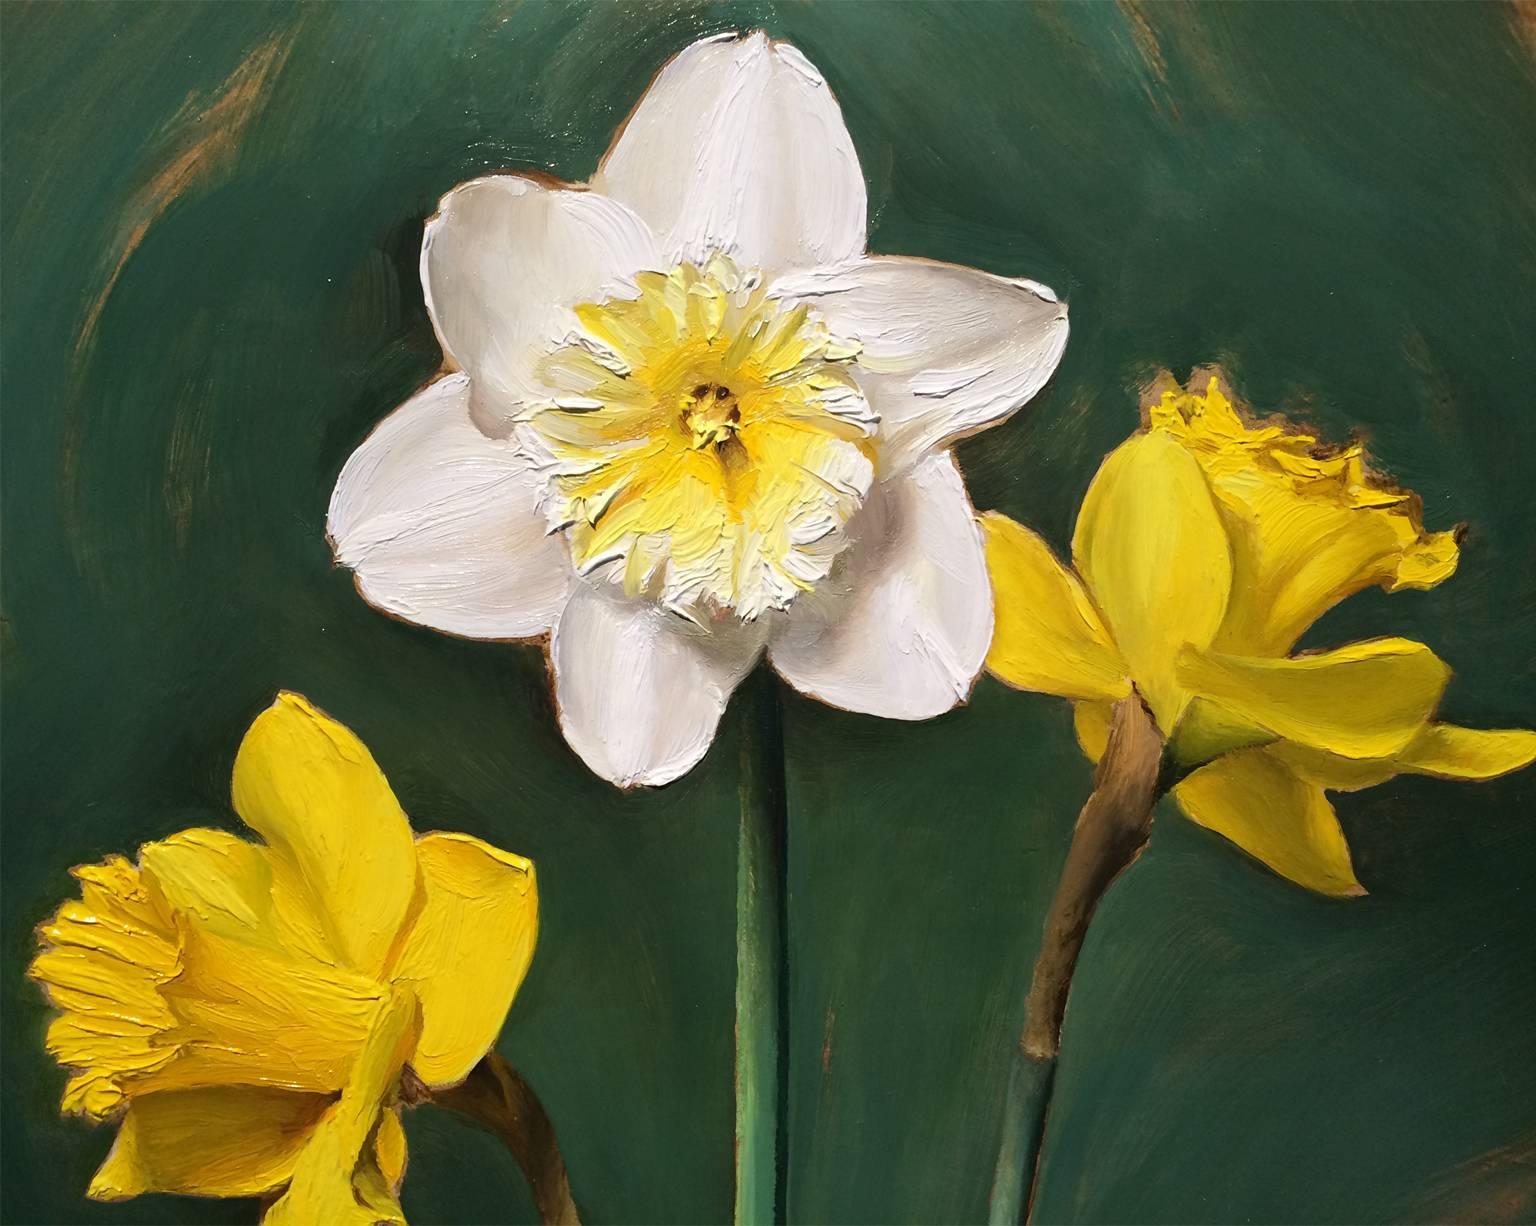 Daffodils by Joseph Q Daily like its title suggests features a trio of daffodils. One white daffodil with a yellow center is featured and supported by a classic yellow daffodil on each side. Daily combines realism with the effortless sweep of